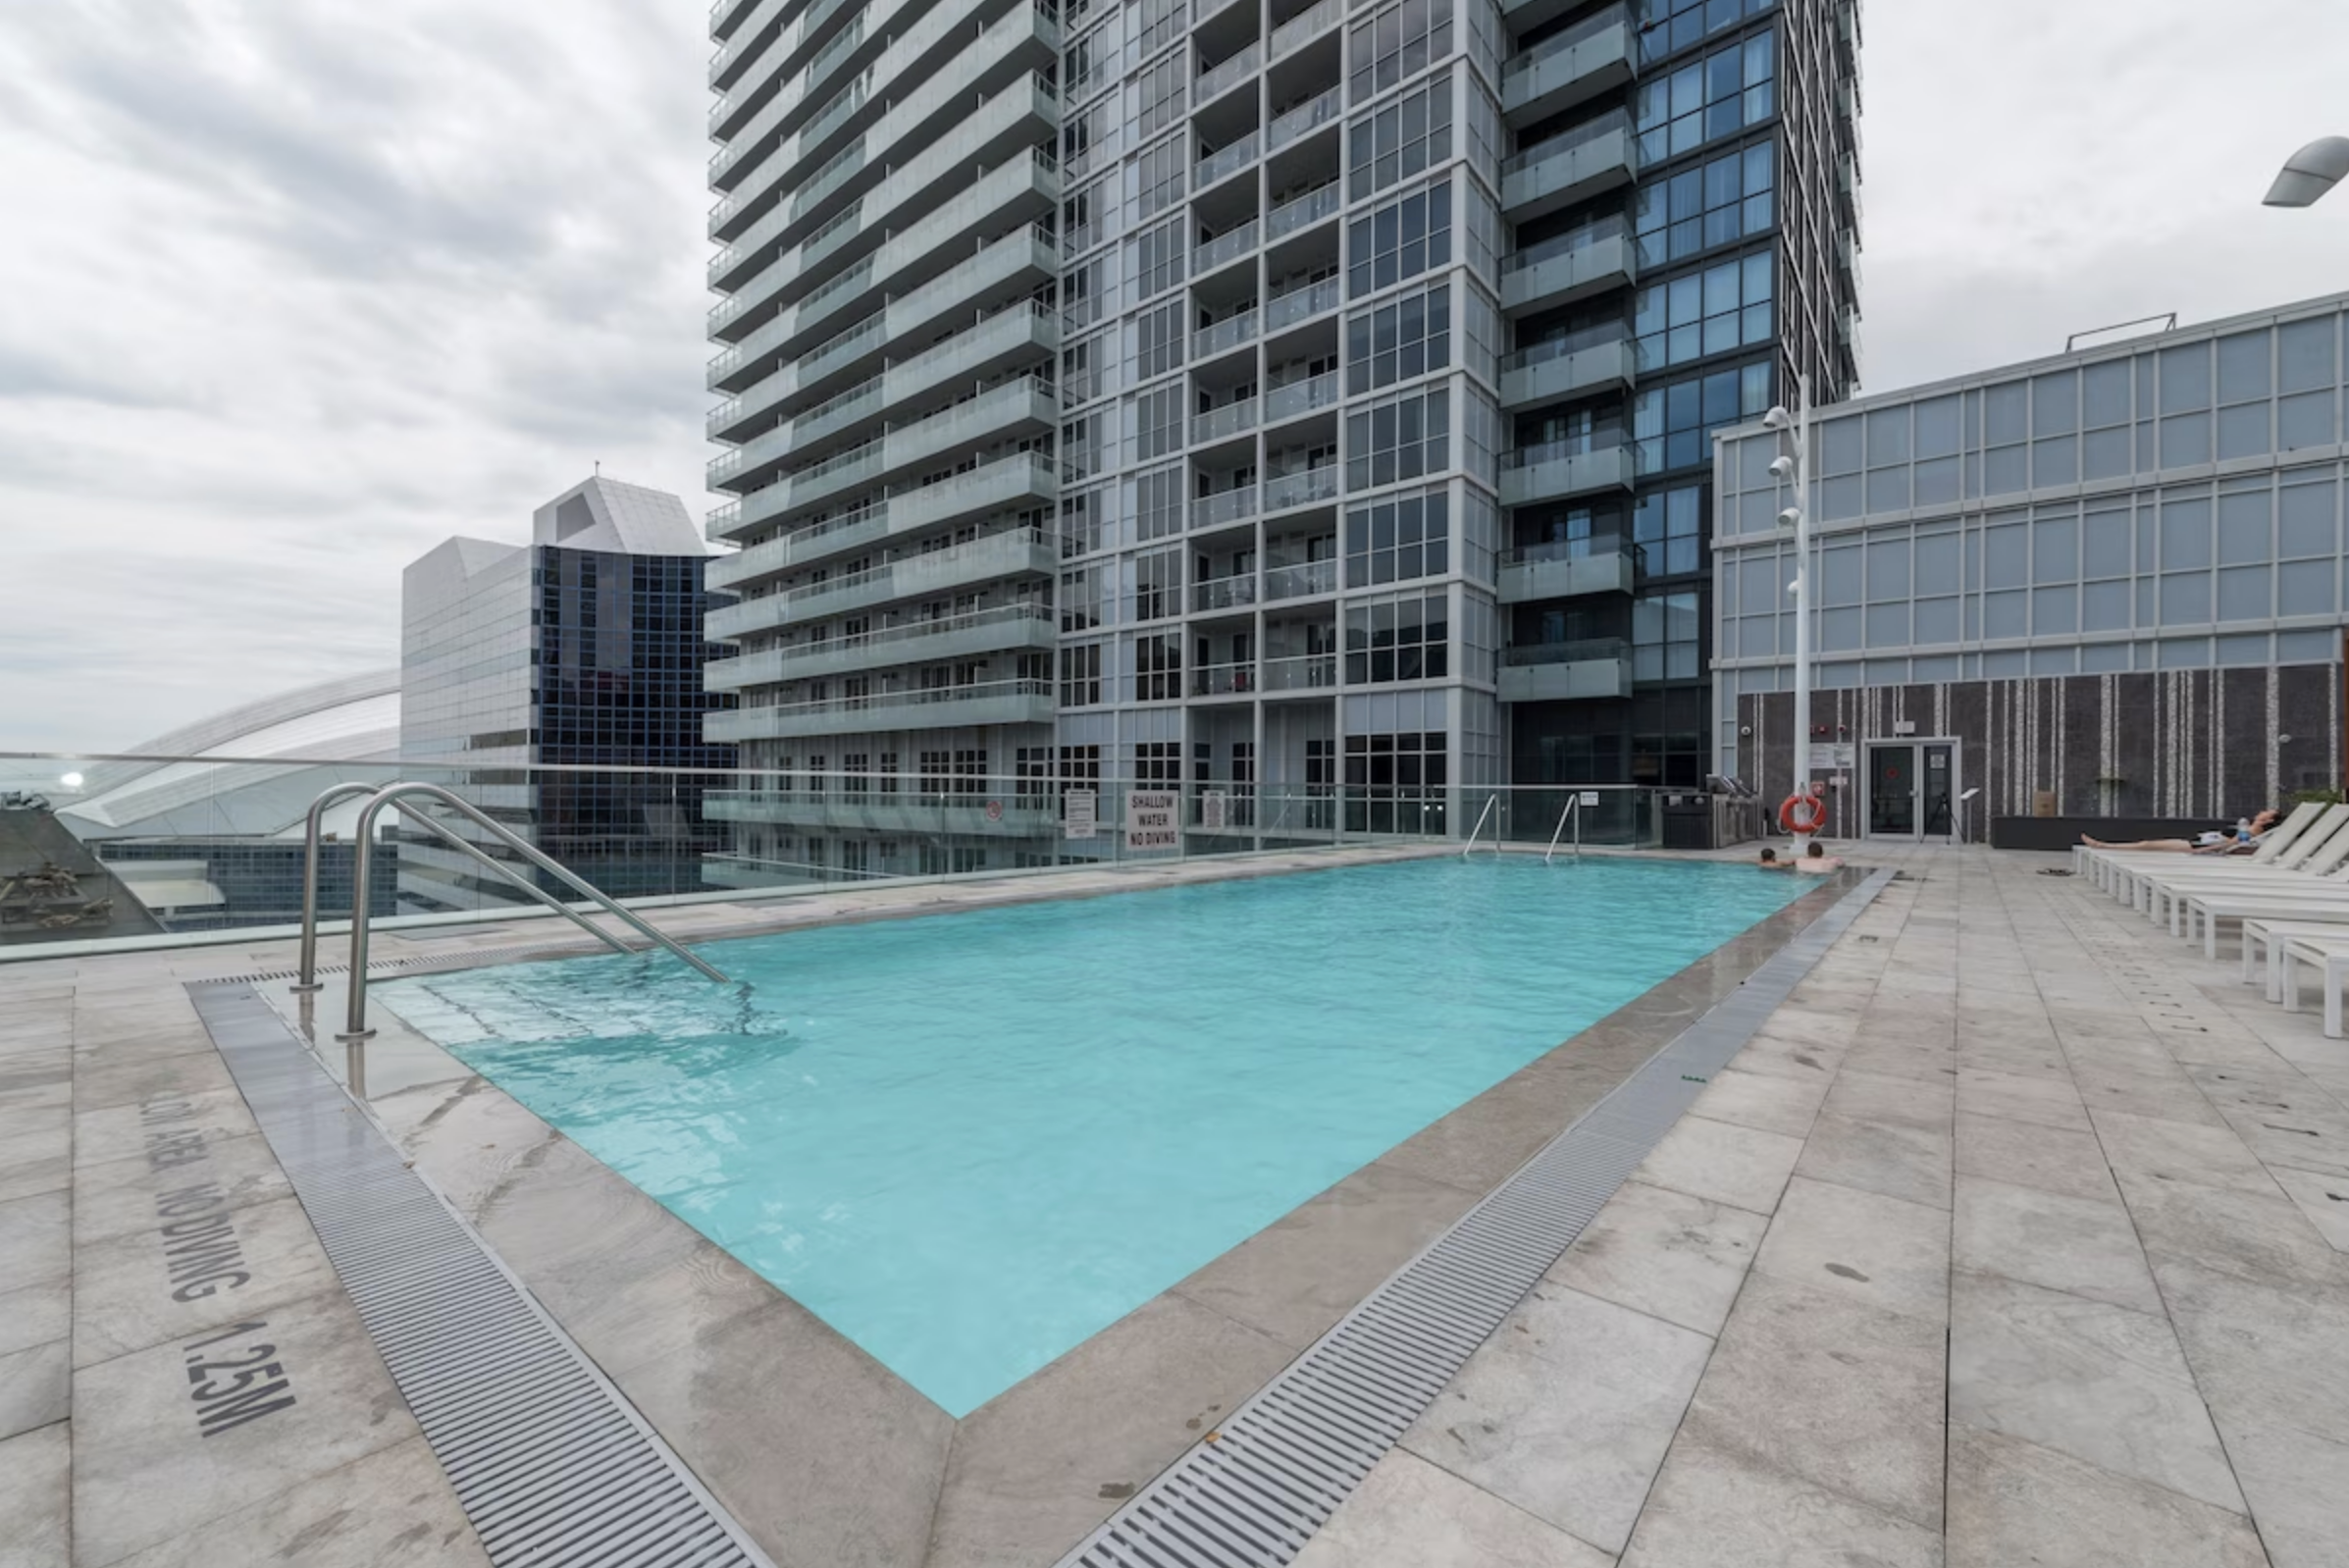 11. Grand Royal Condos - CN Tower - Best Hotels in Toronto with Rooftop Pools